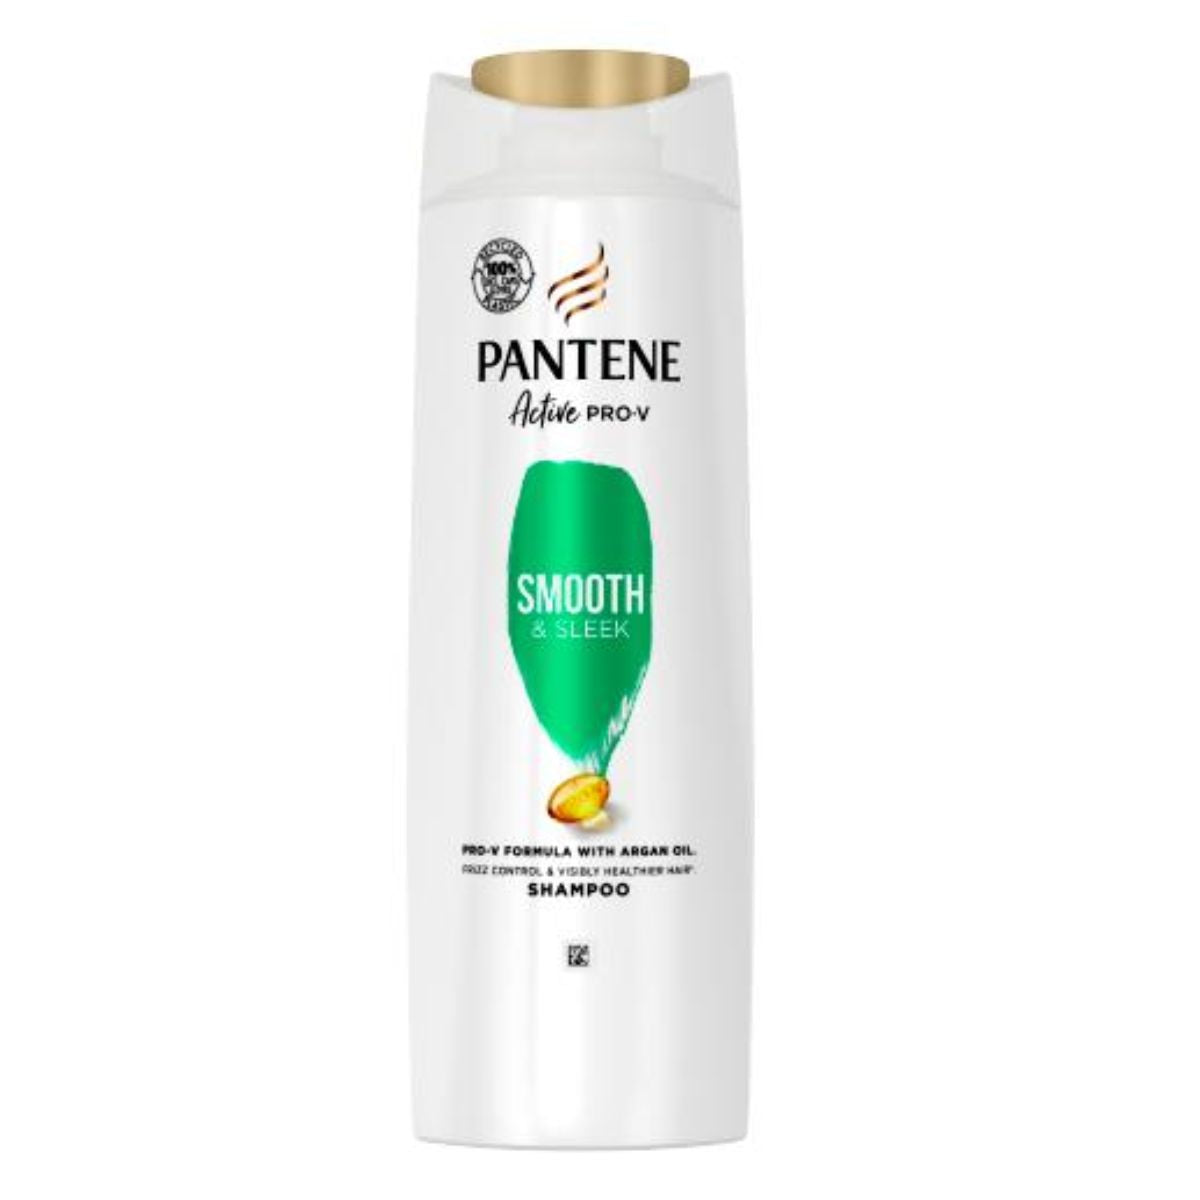 A bottle of Pantene - Smooth & Silky Shampoo - 400ml with argan oil against a white background.